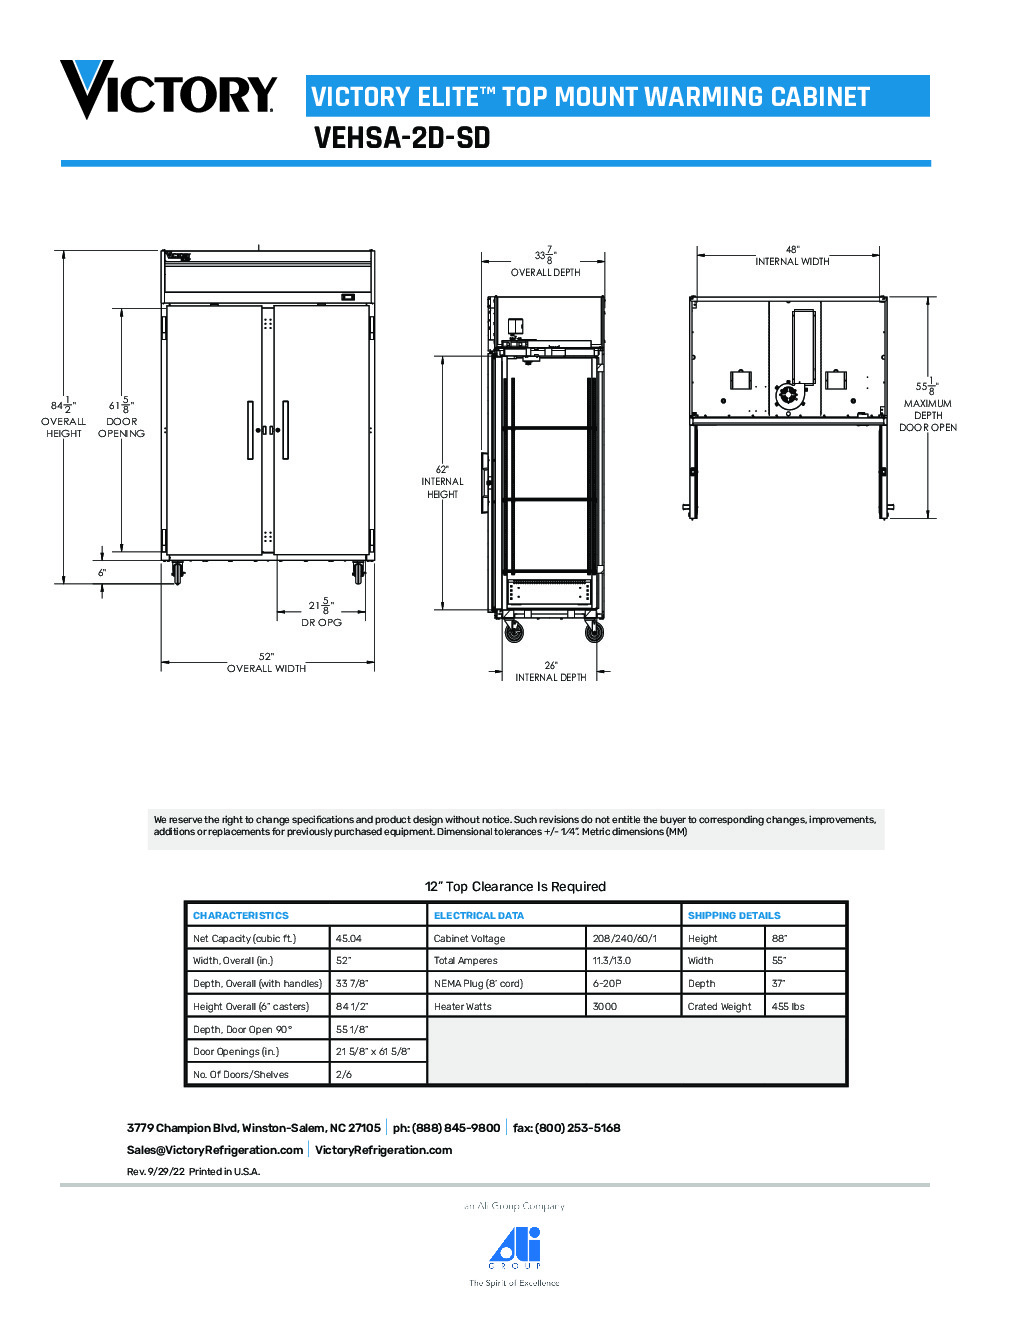 Victory VEHSA-2D-SD Reach-In Heated Cabinet